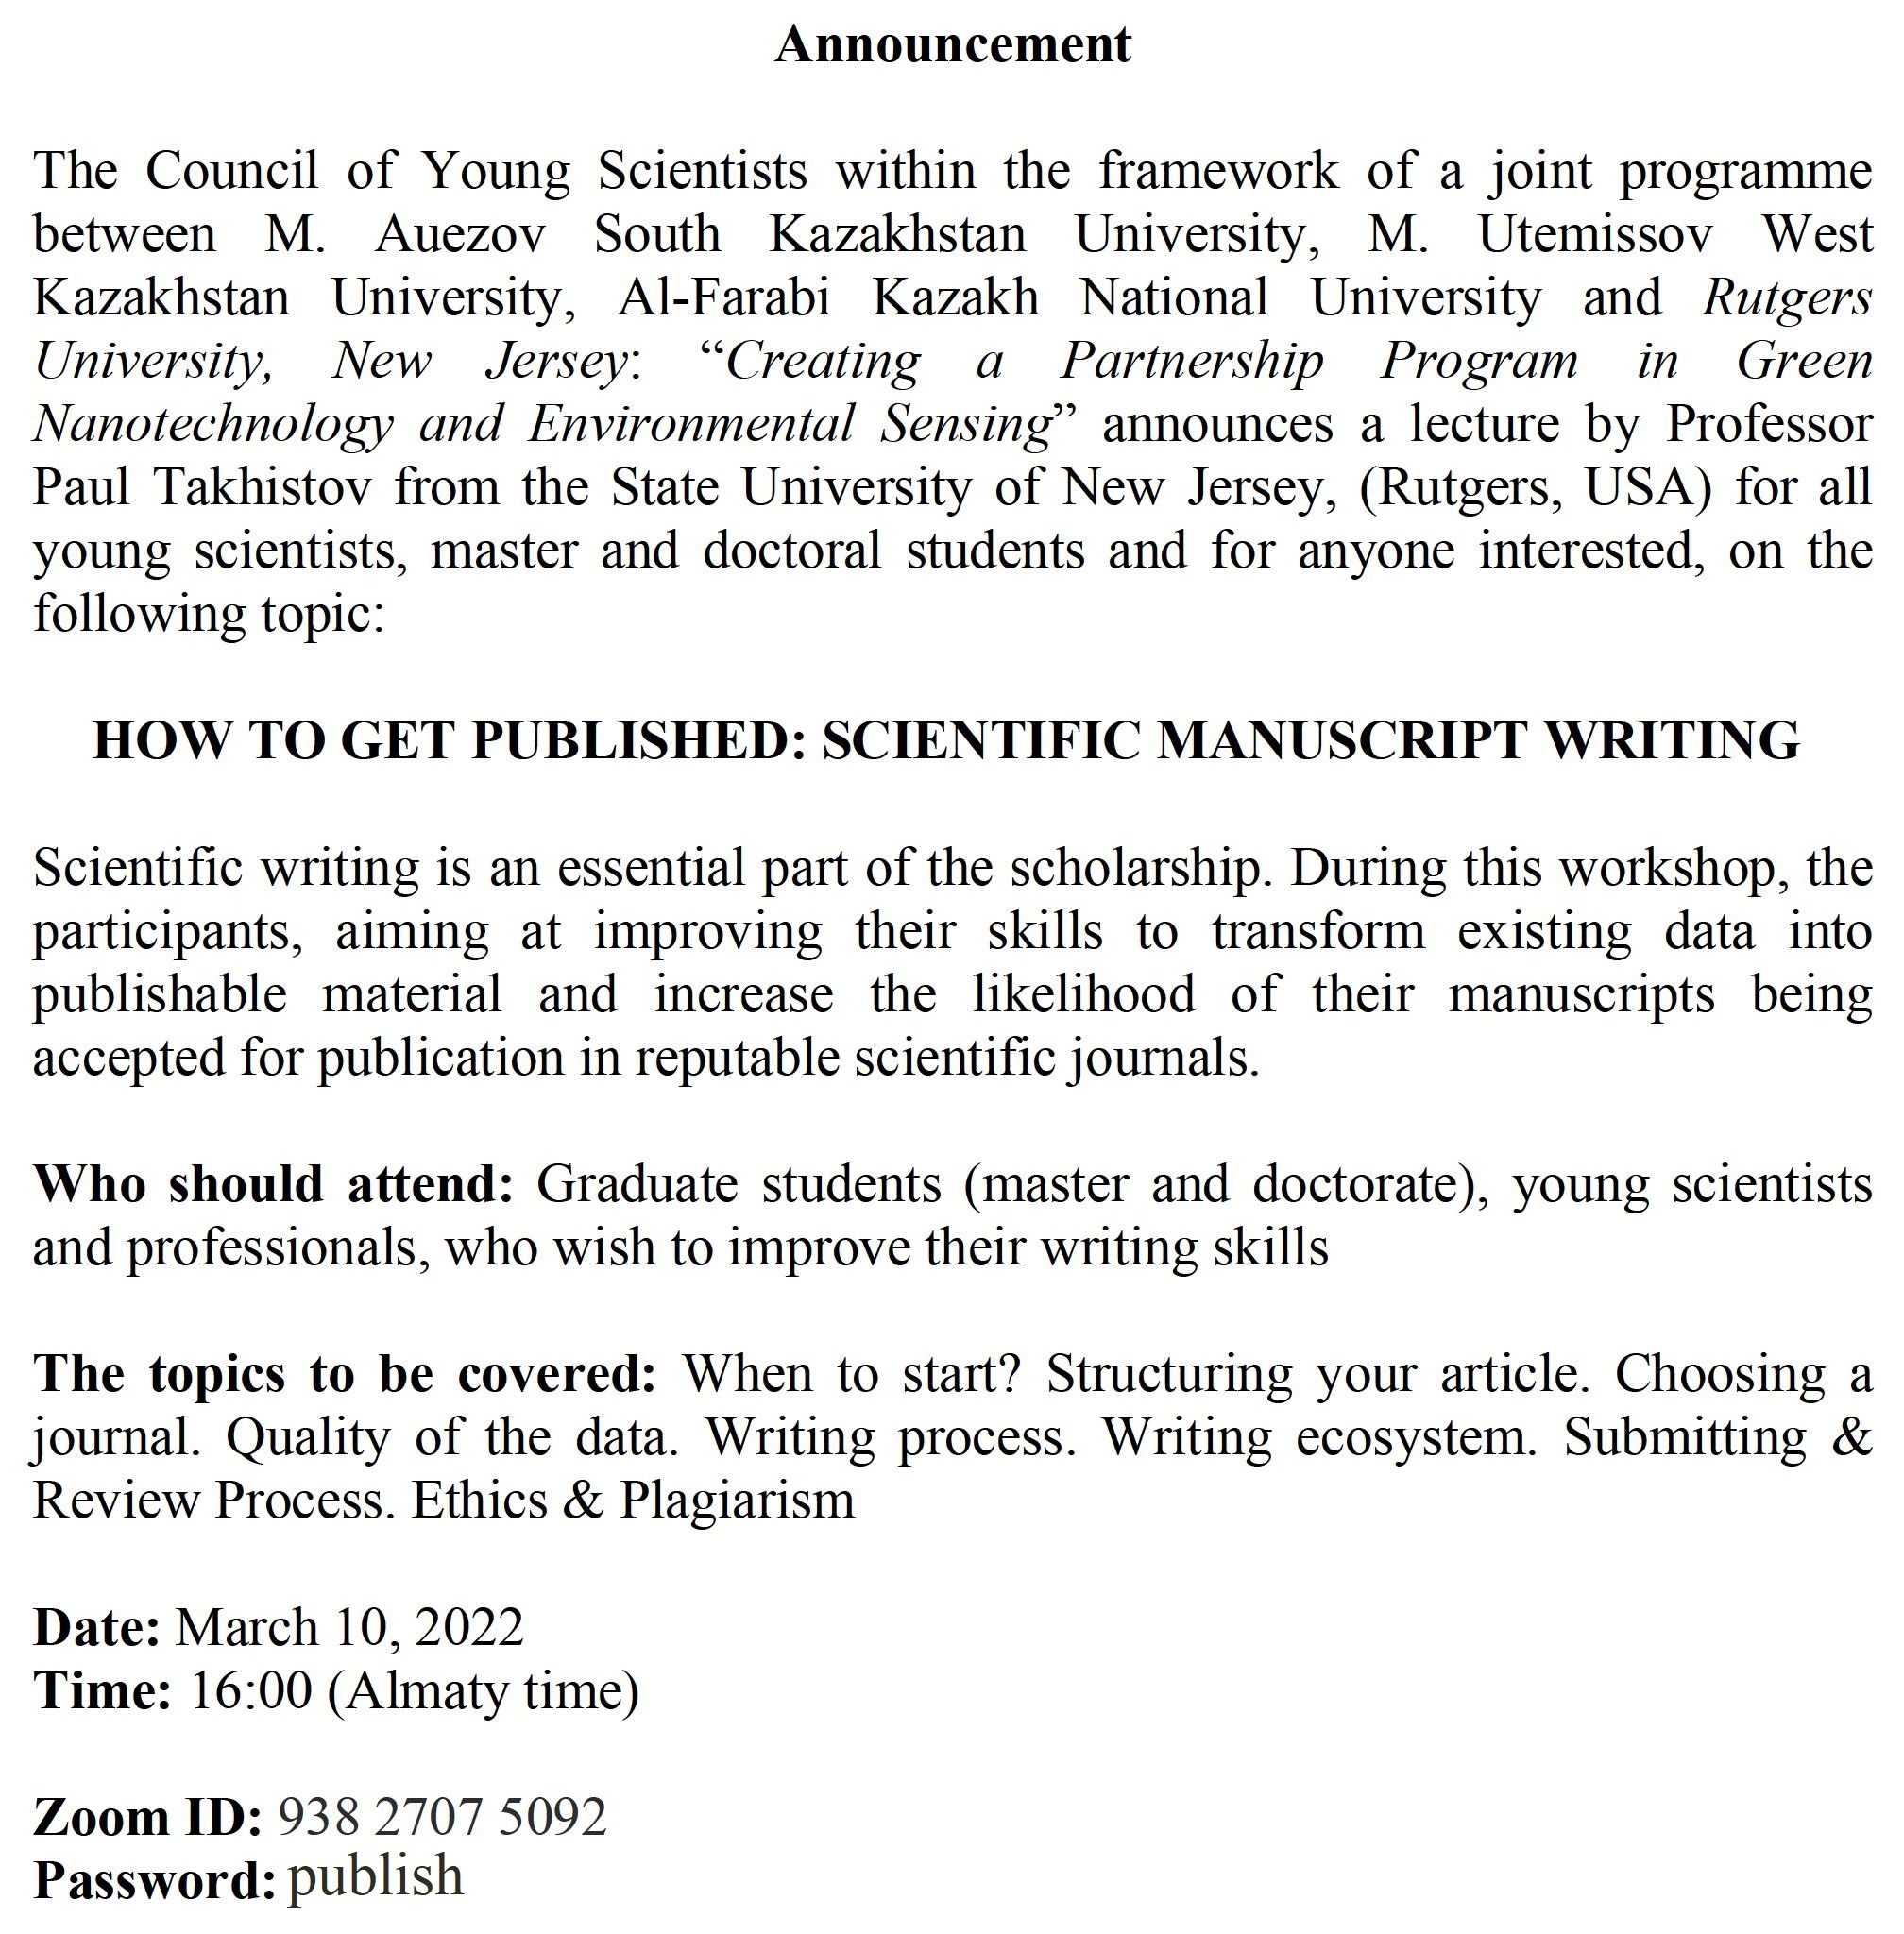 Announcement of a lecture on the topic: “How to get published: scientific manuscript writing”